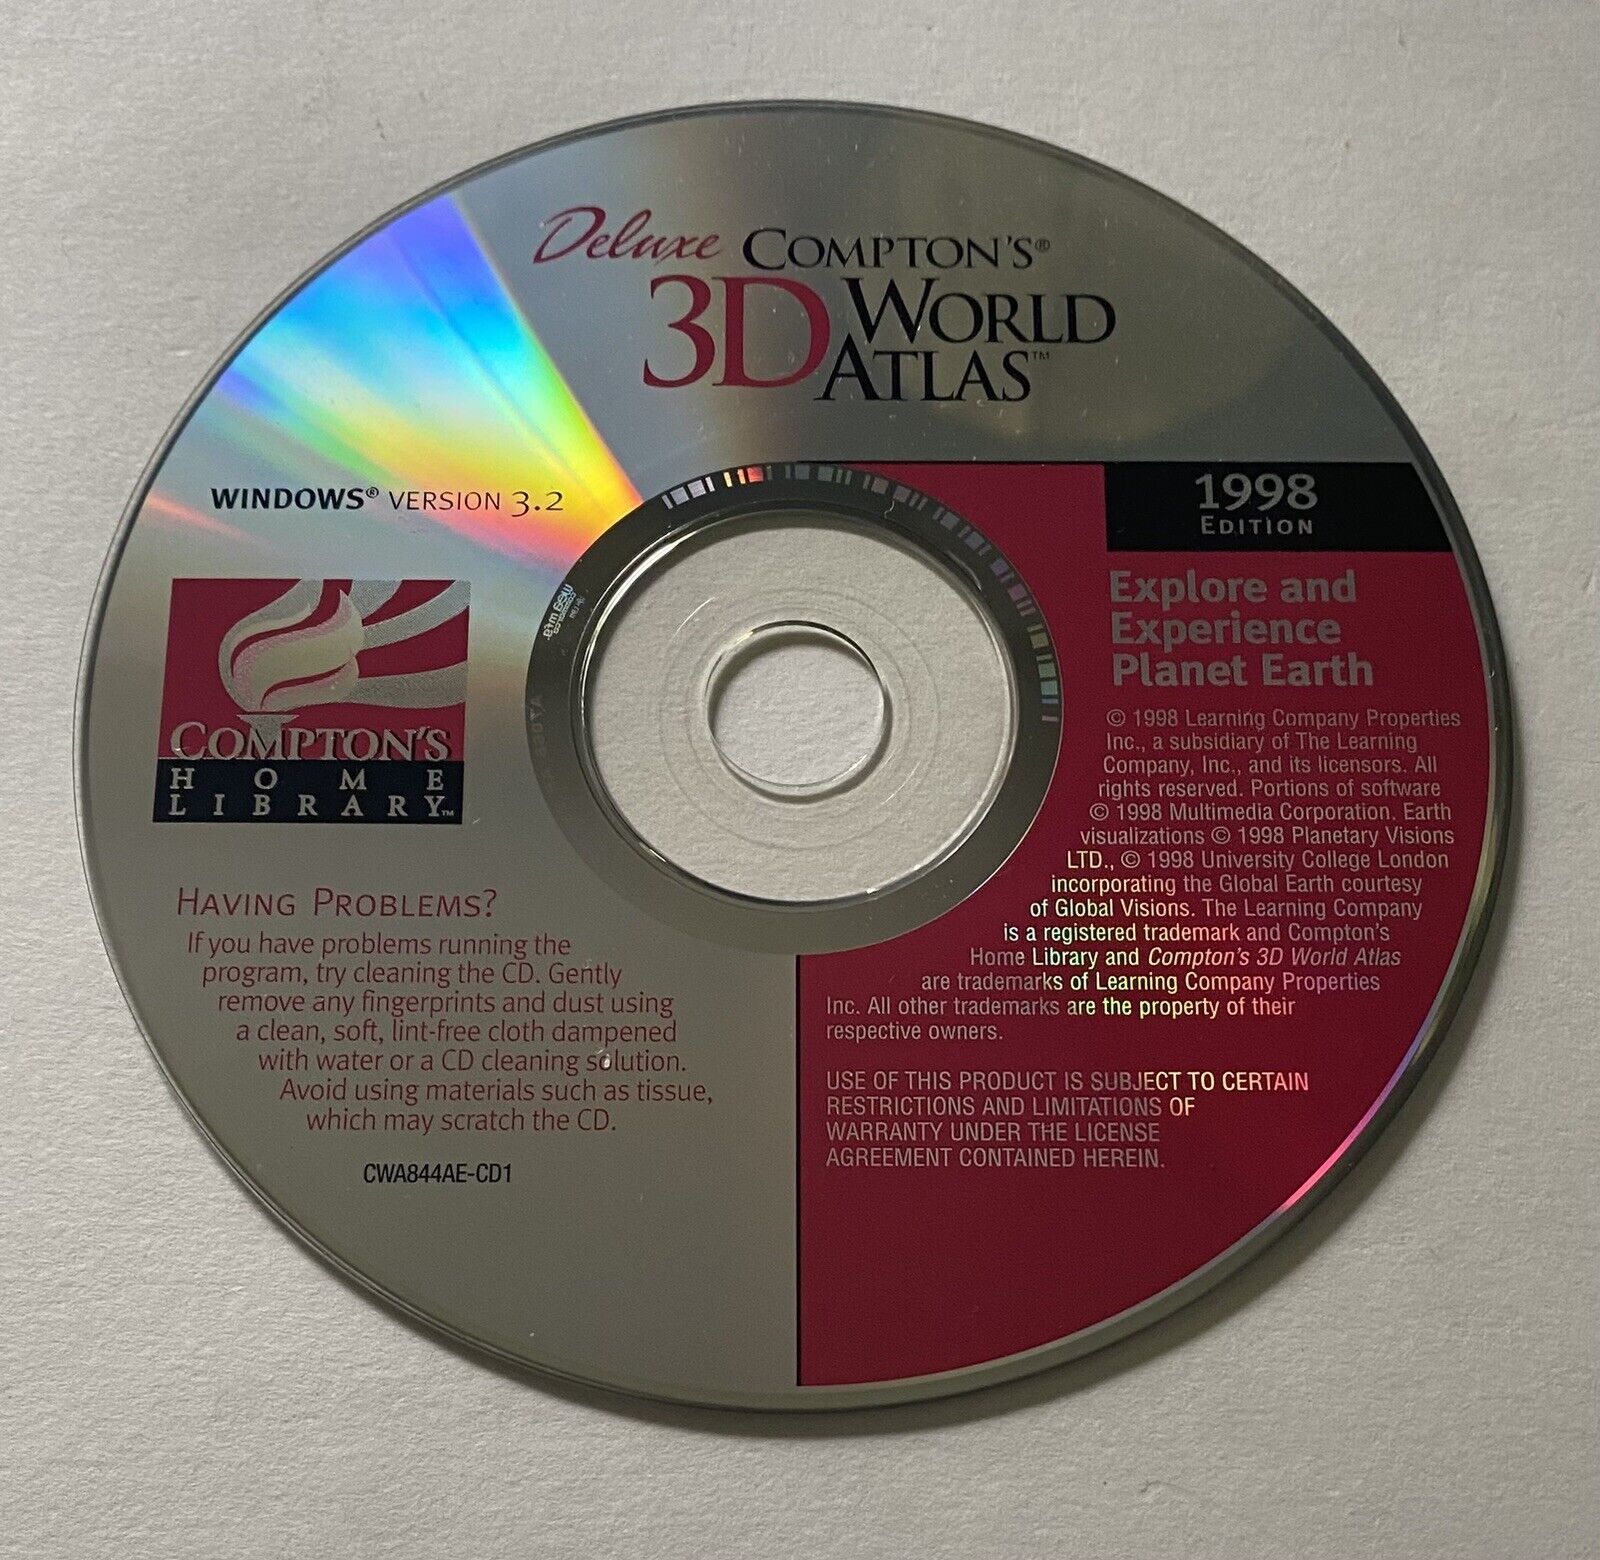 Deluxe Compton's 3D World Atlas PC CD-ROM Software 1998